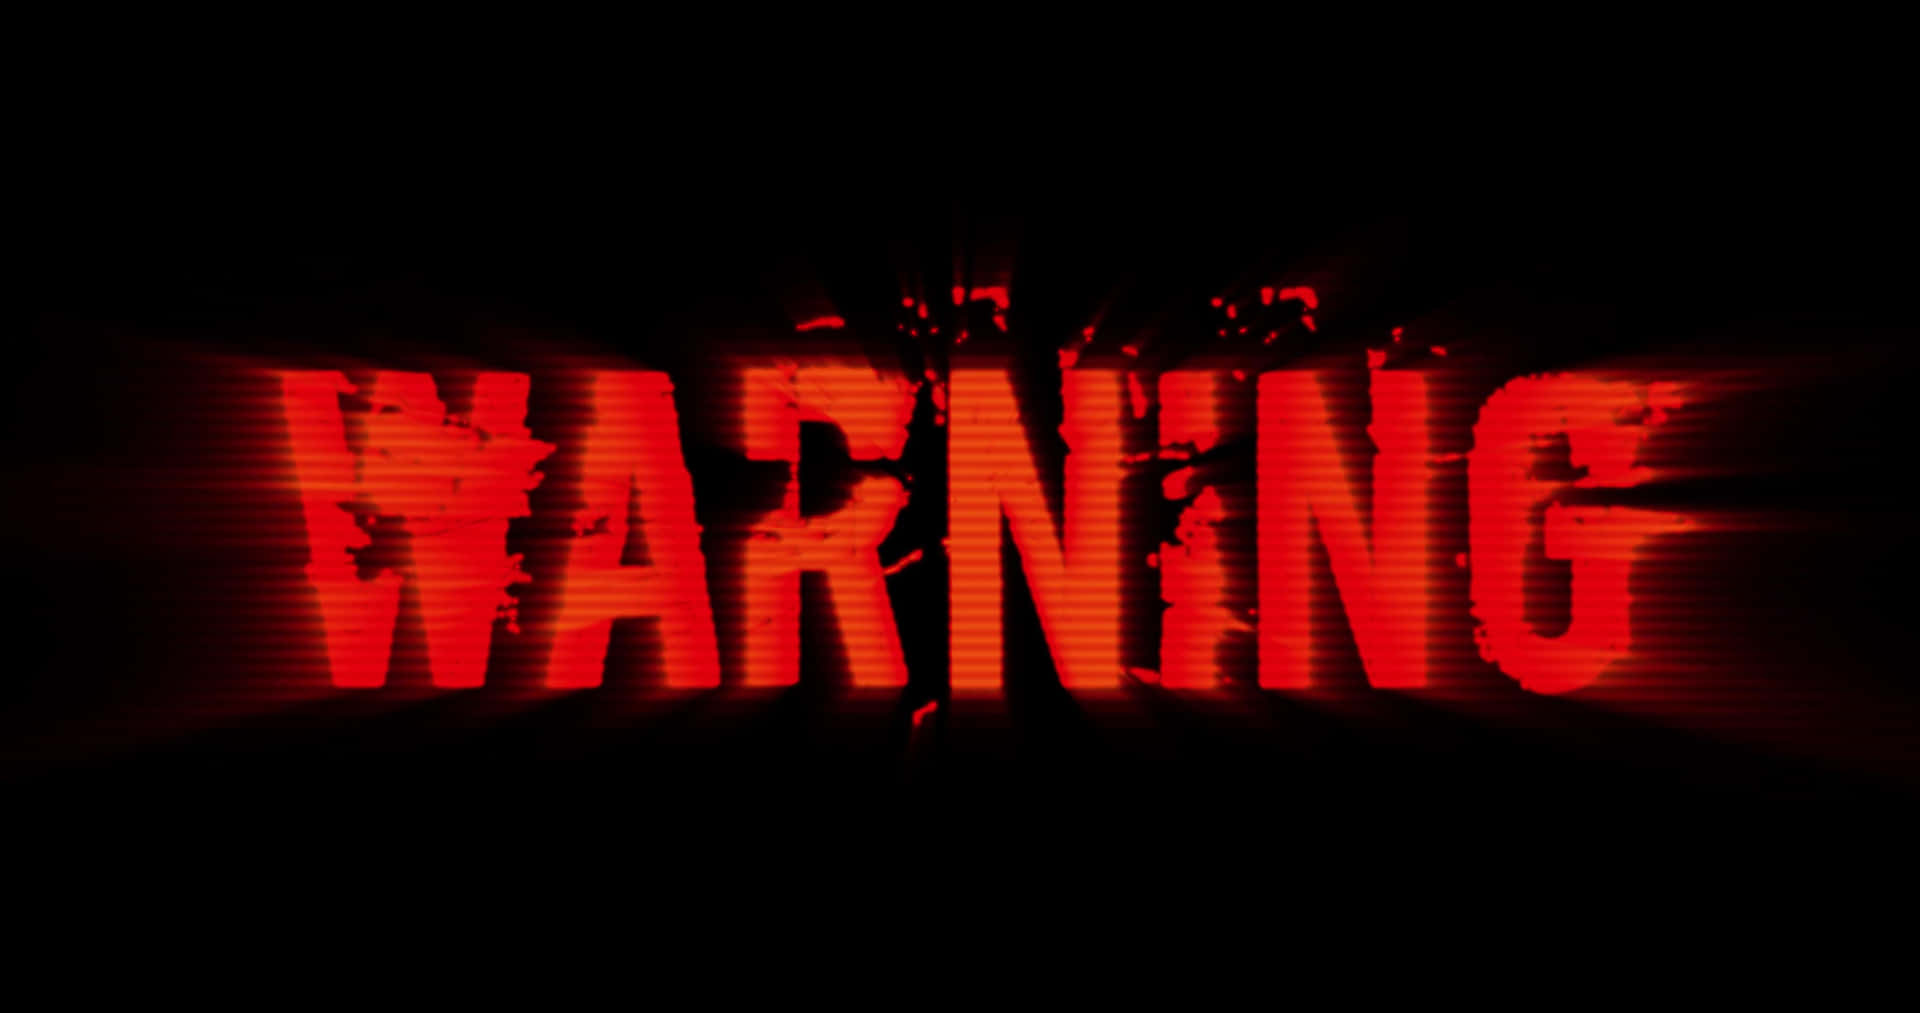 Download Warning wallpapers for mobile phone free Warning HD pictures